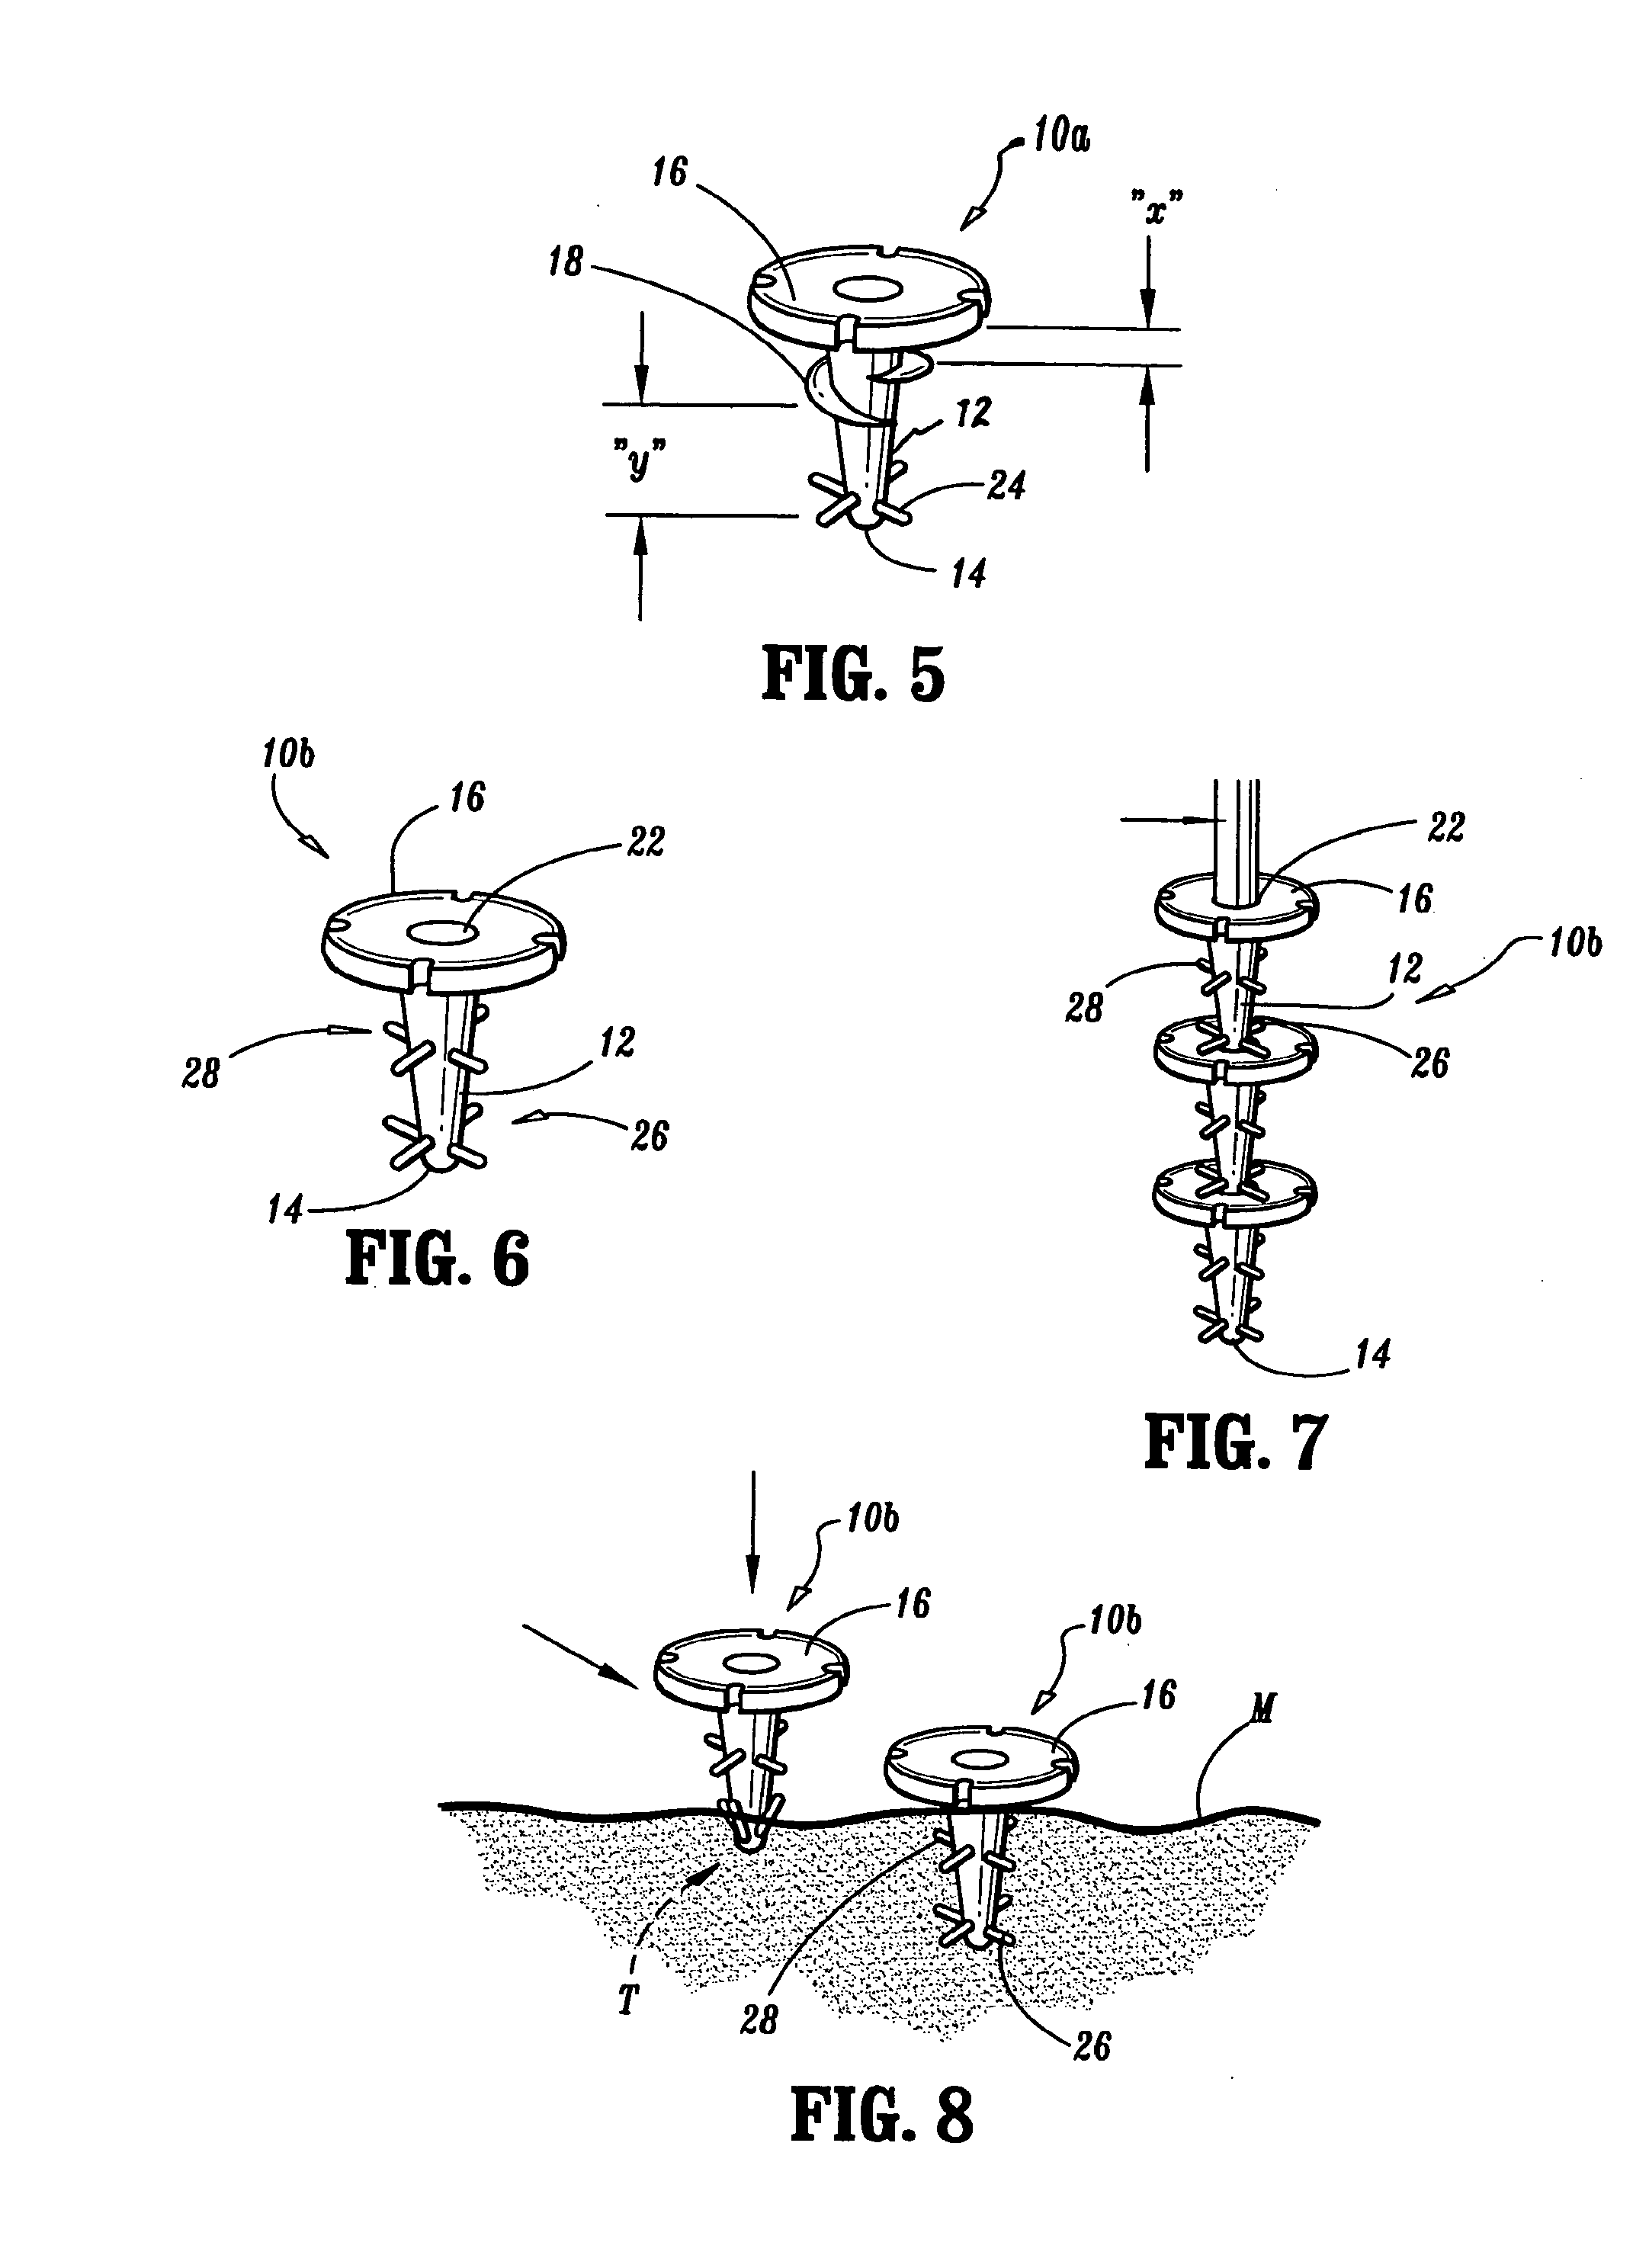 Surgical fasteners